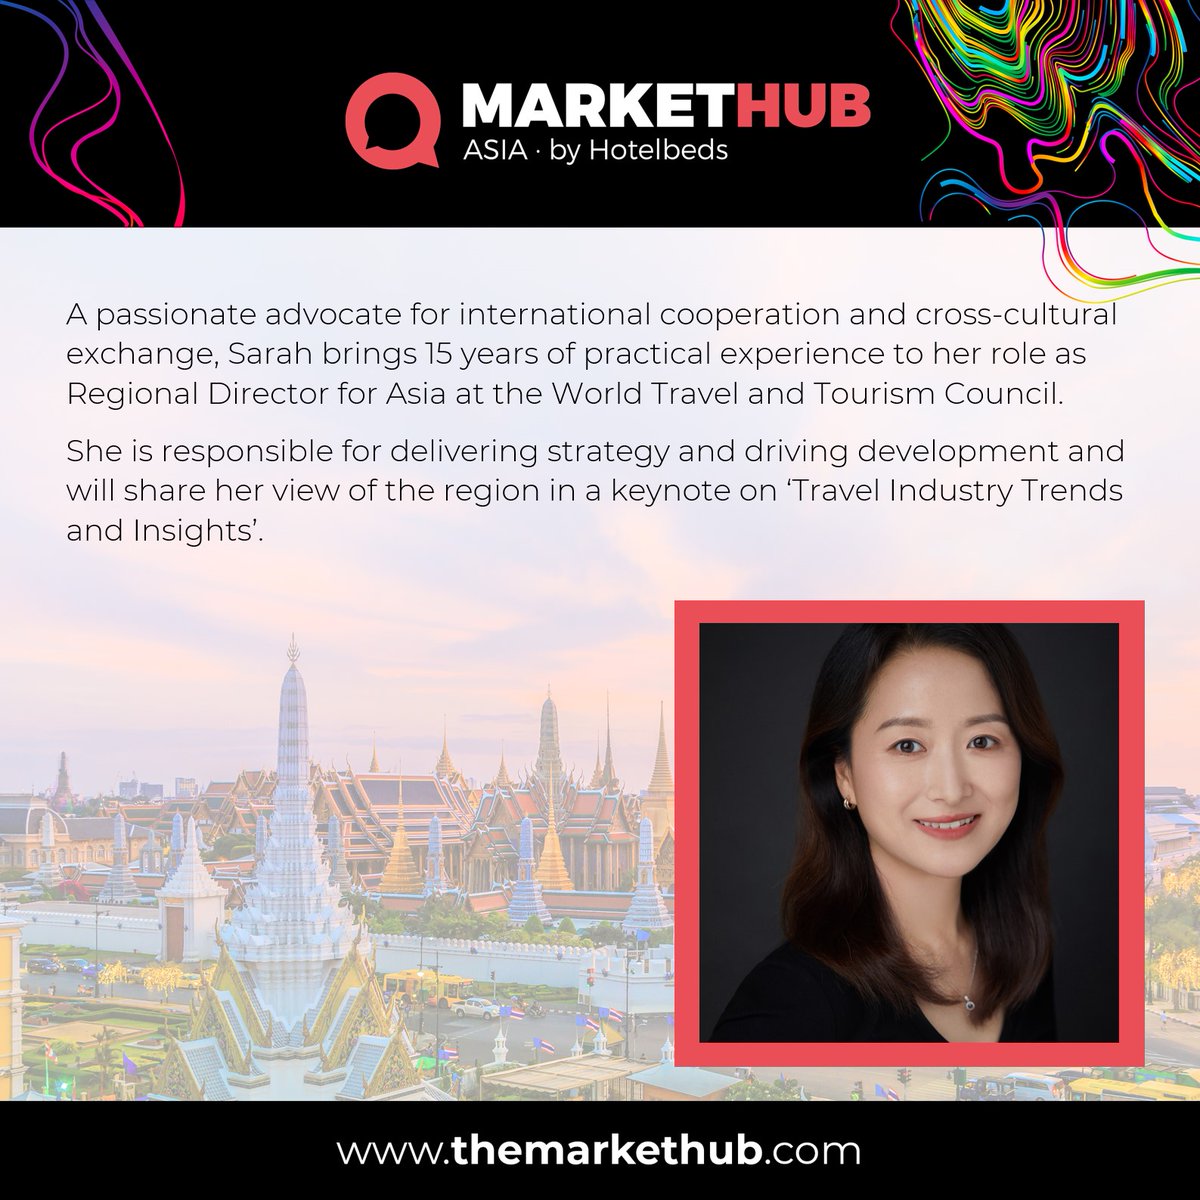 Over the course of the next two days at MarketHub Asia, we have many engaging talks and panel discussions lined up. To give you a sneak preview of what's to come, we'll be putting some of our speakers in the spotlight. First up, Sarah Wang, Regional Director for Asia at the @WTTC